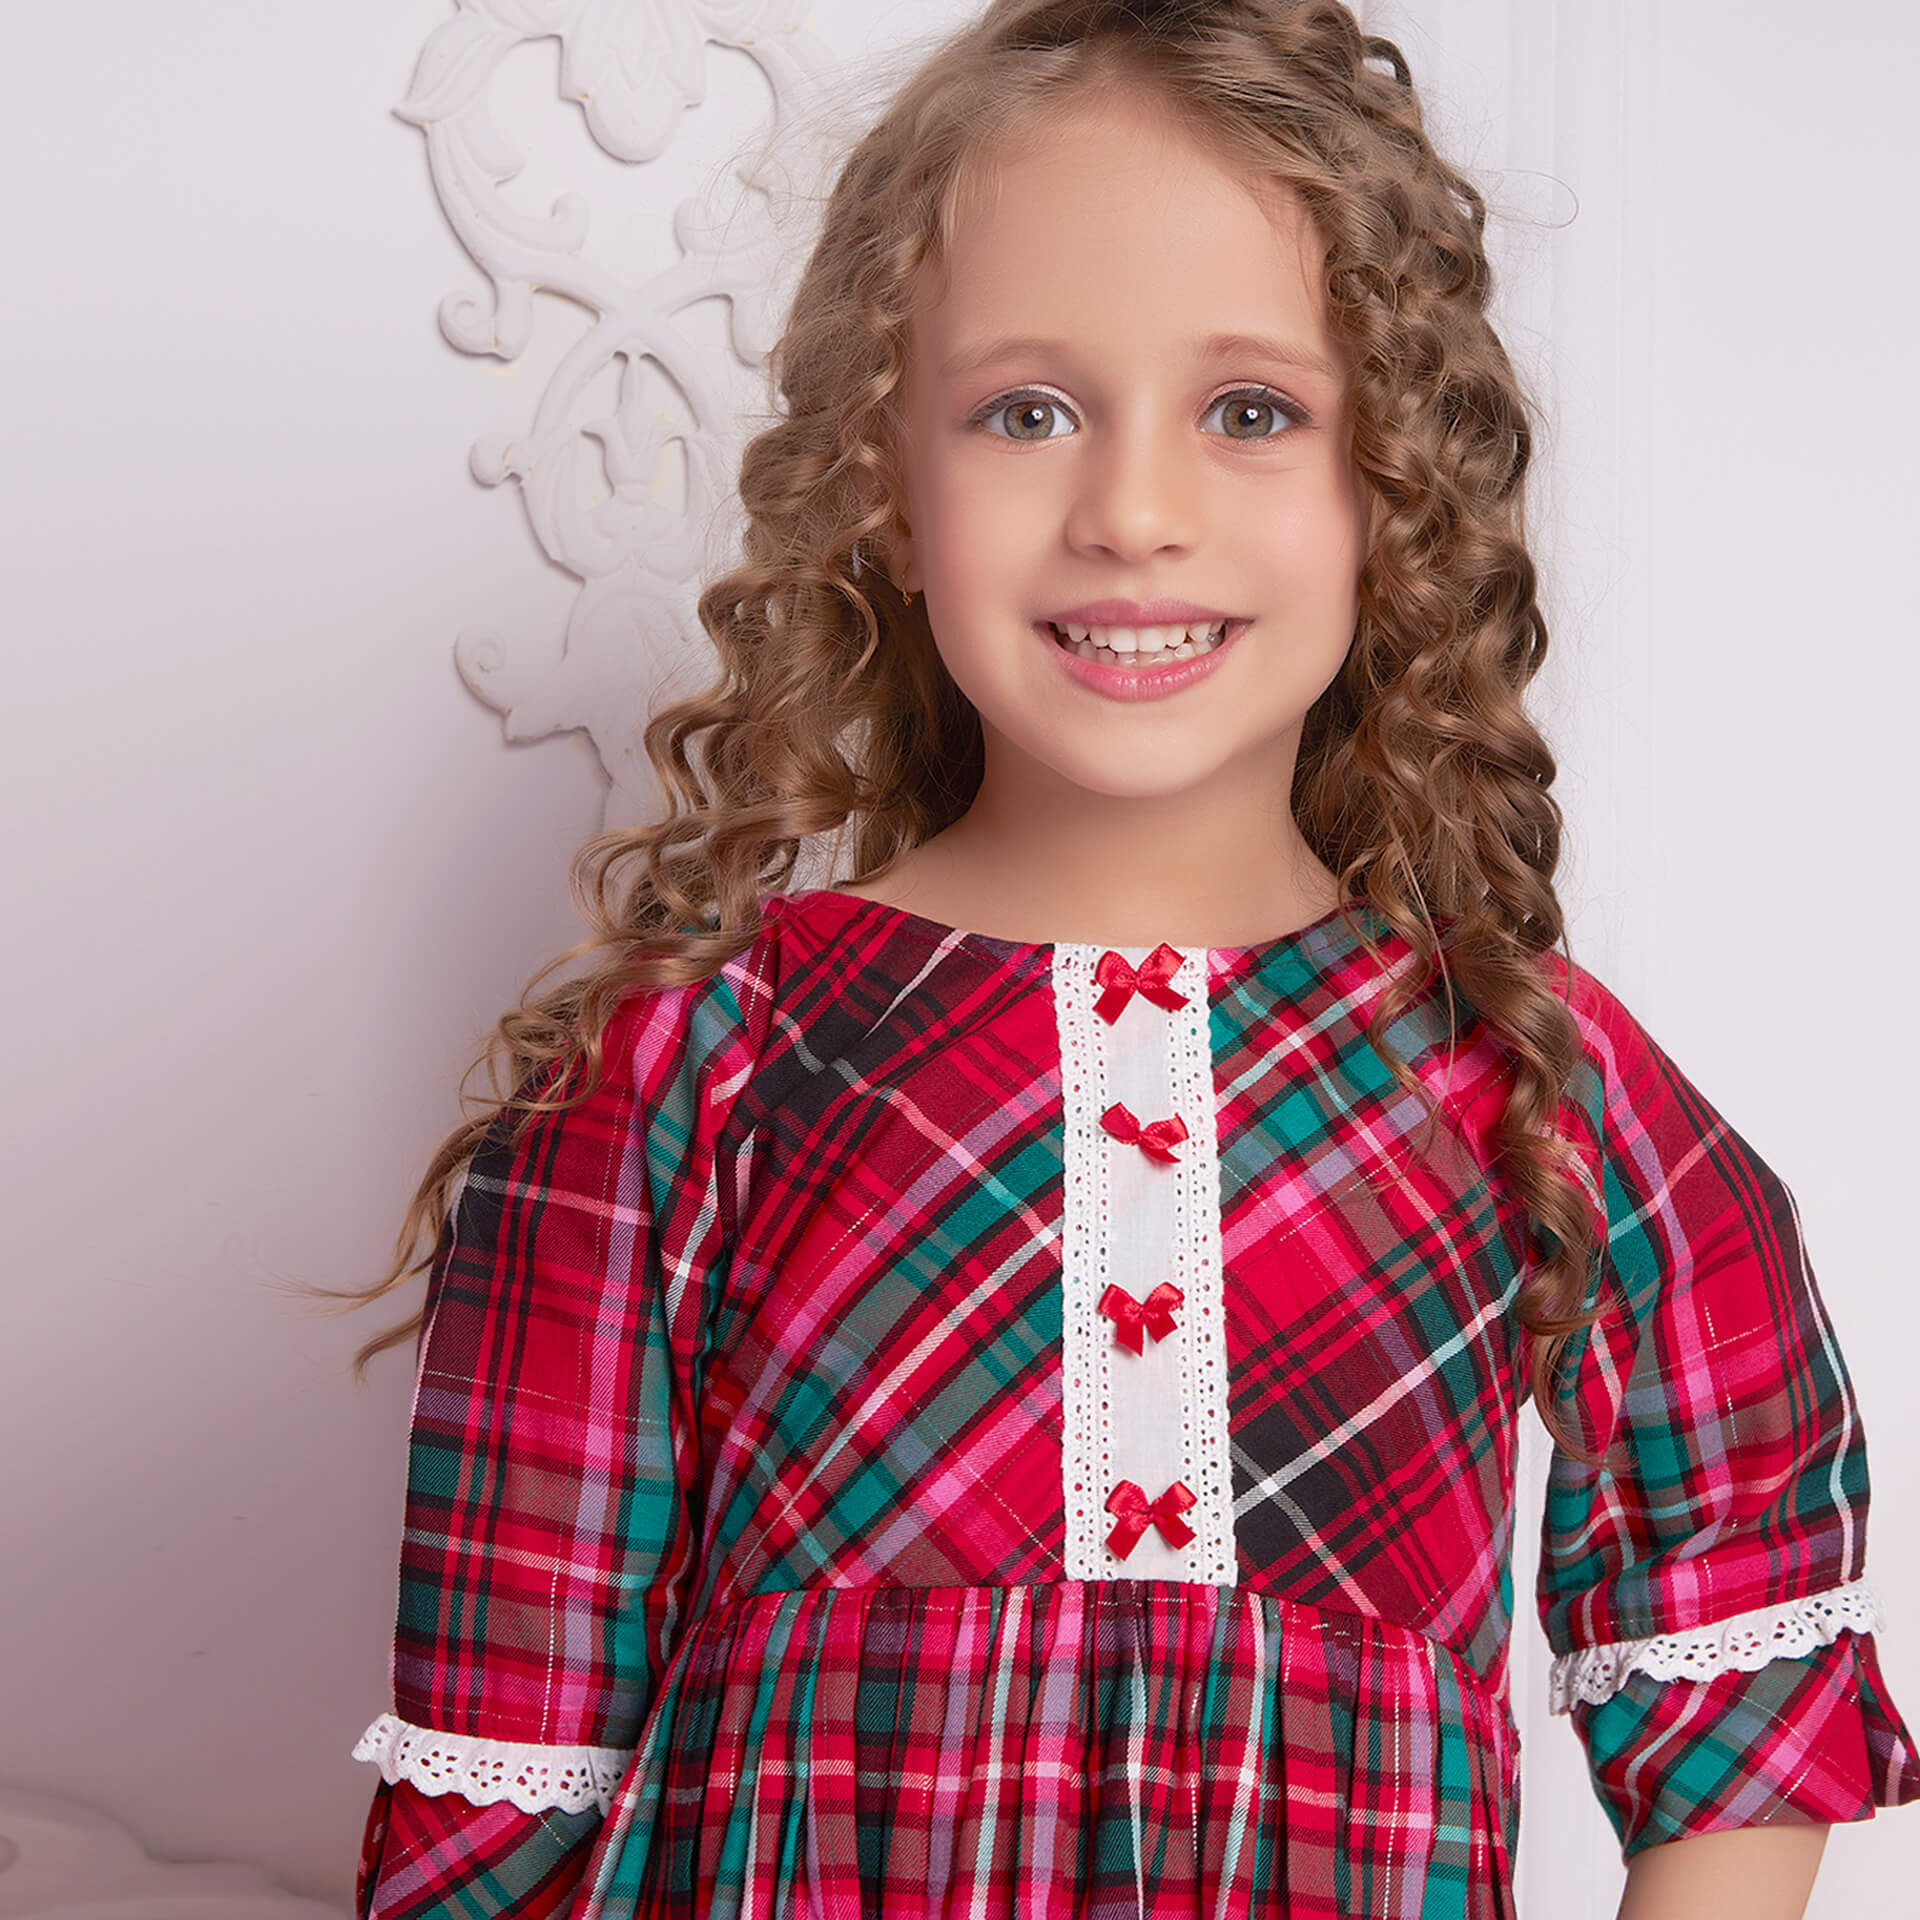 Close-up of a happy little girl in a pink plaid dress with lace and satin bows